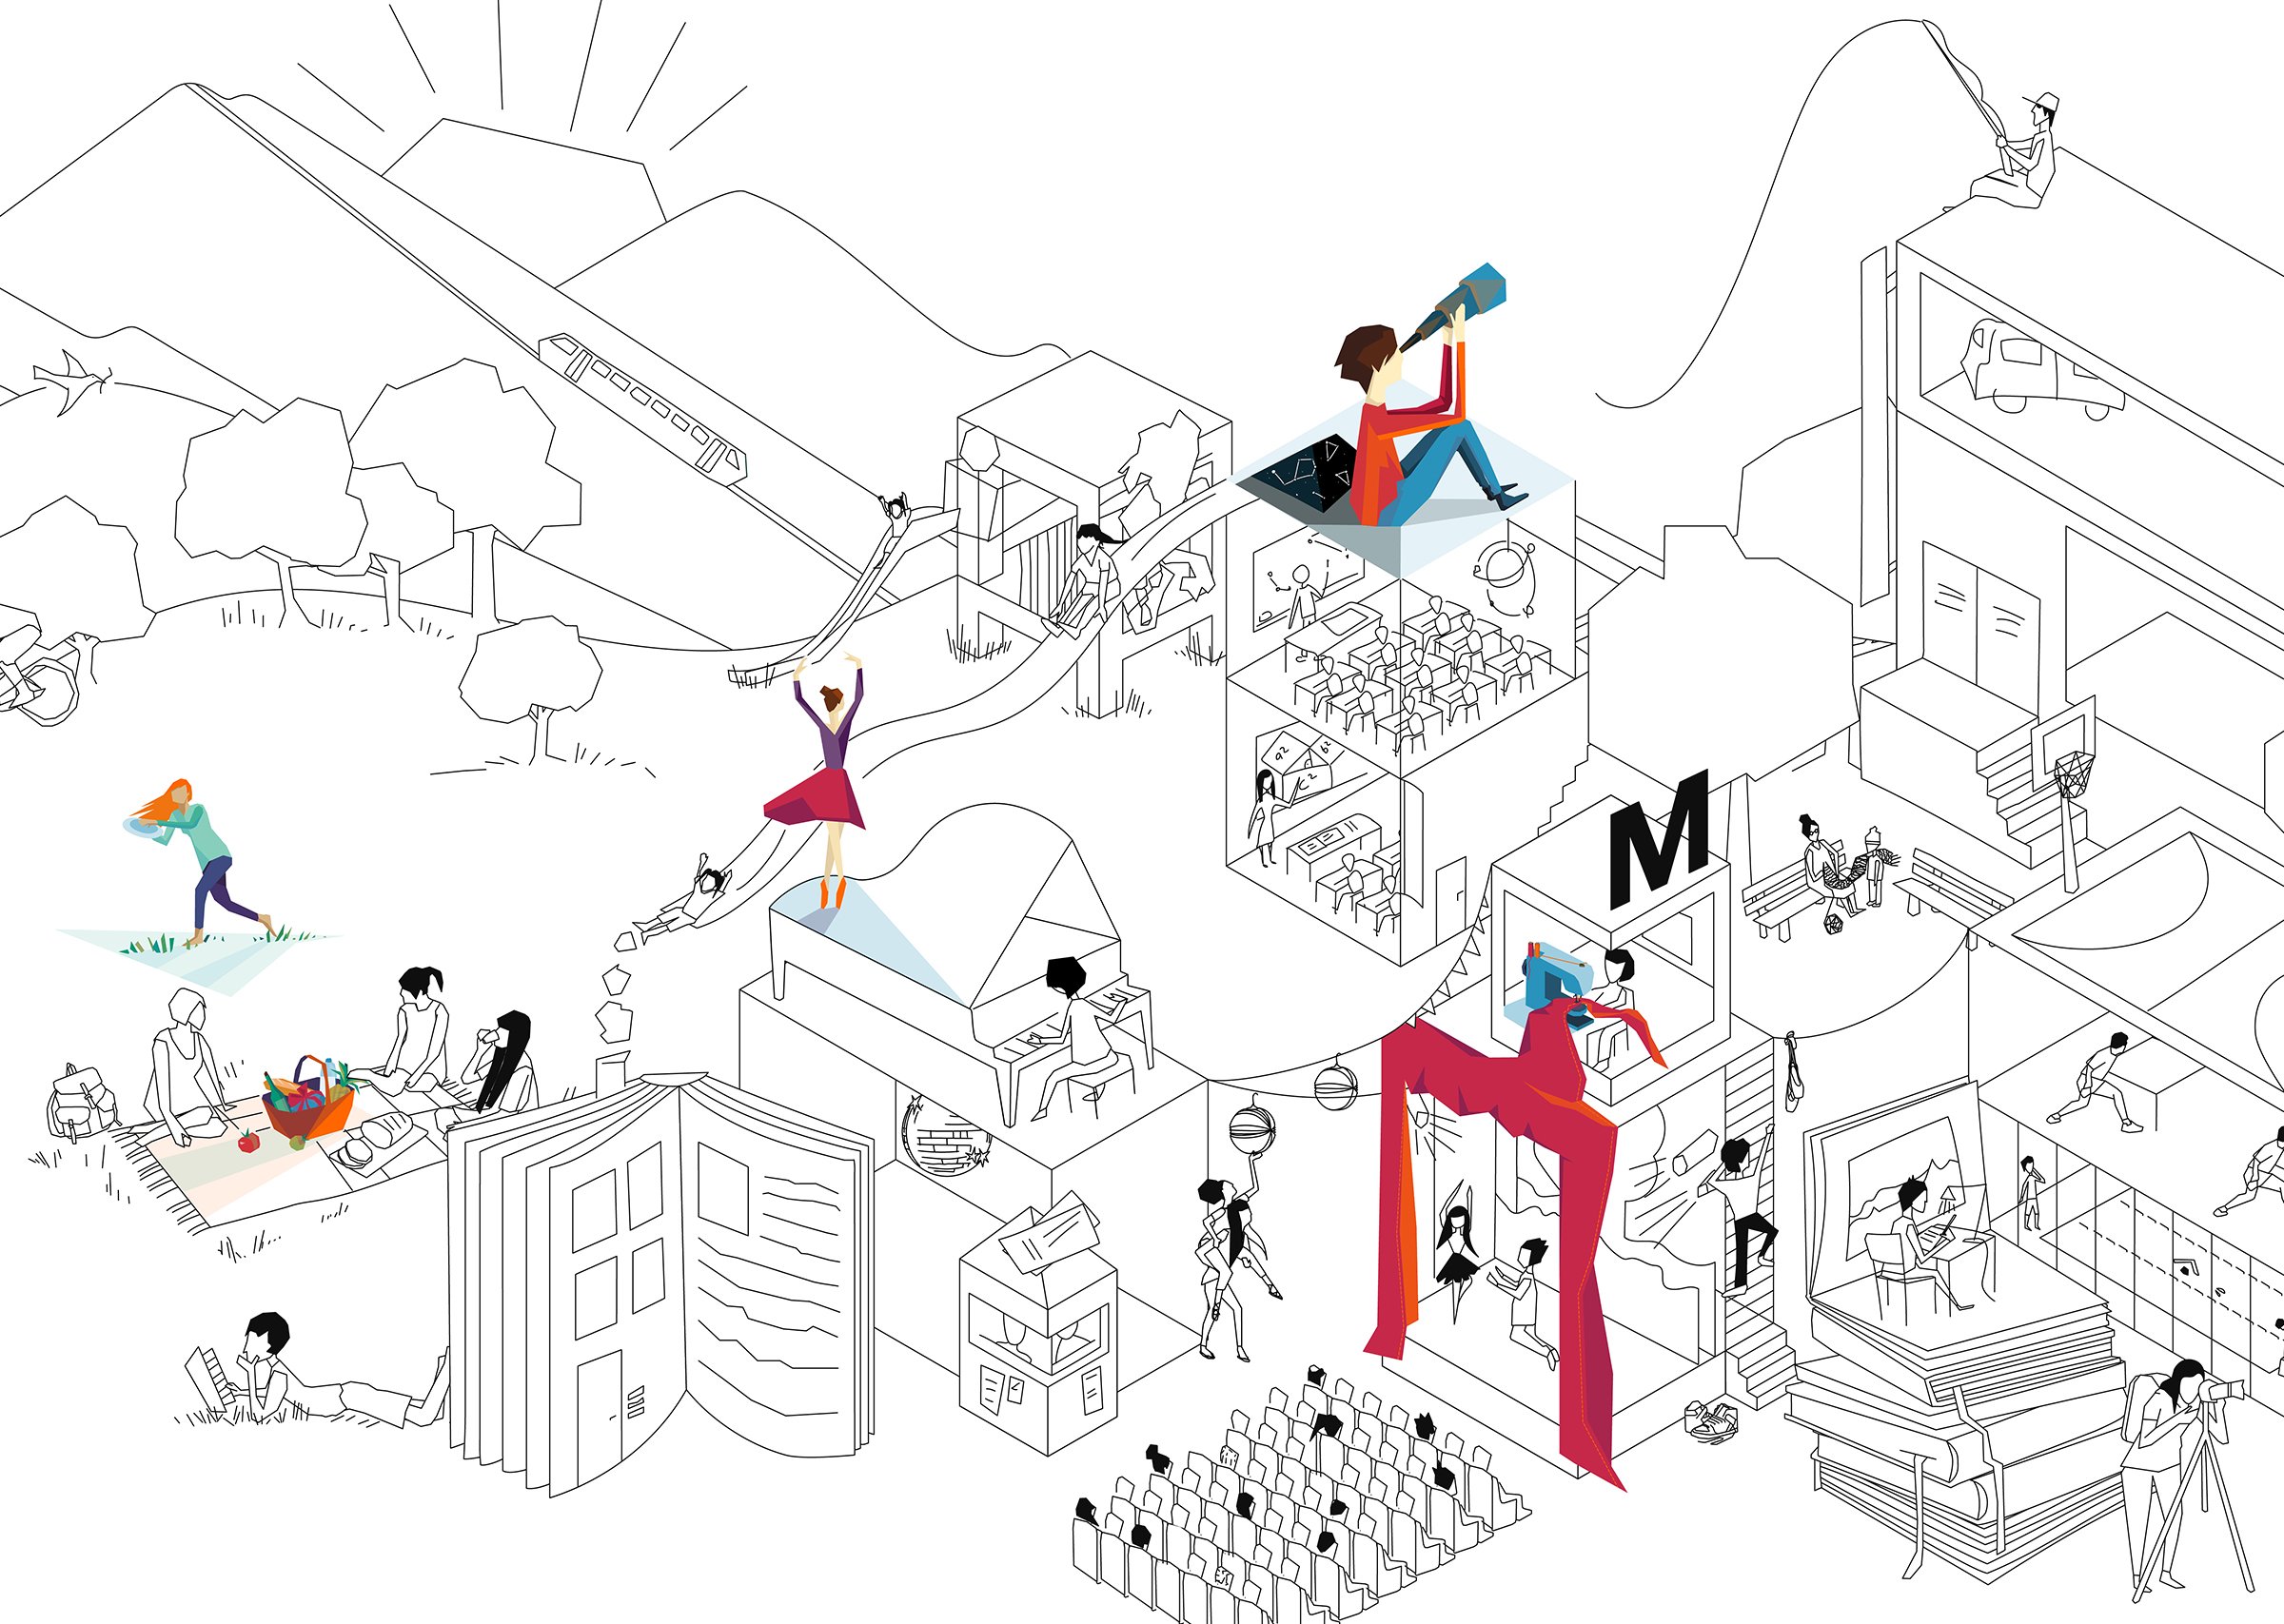 Wimmelbild illustration for Migros' Cultural Percantage project